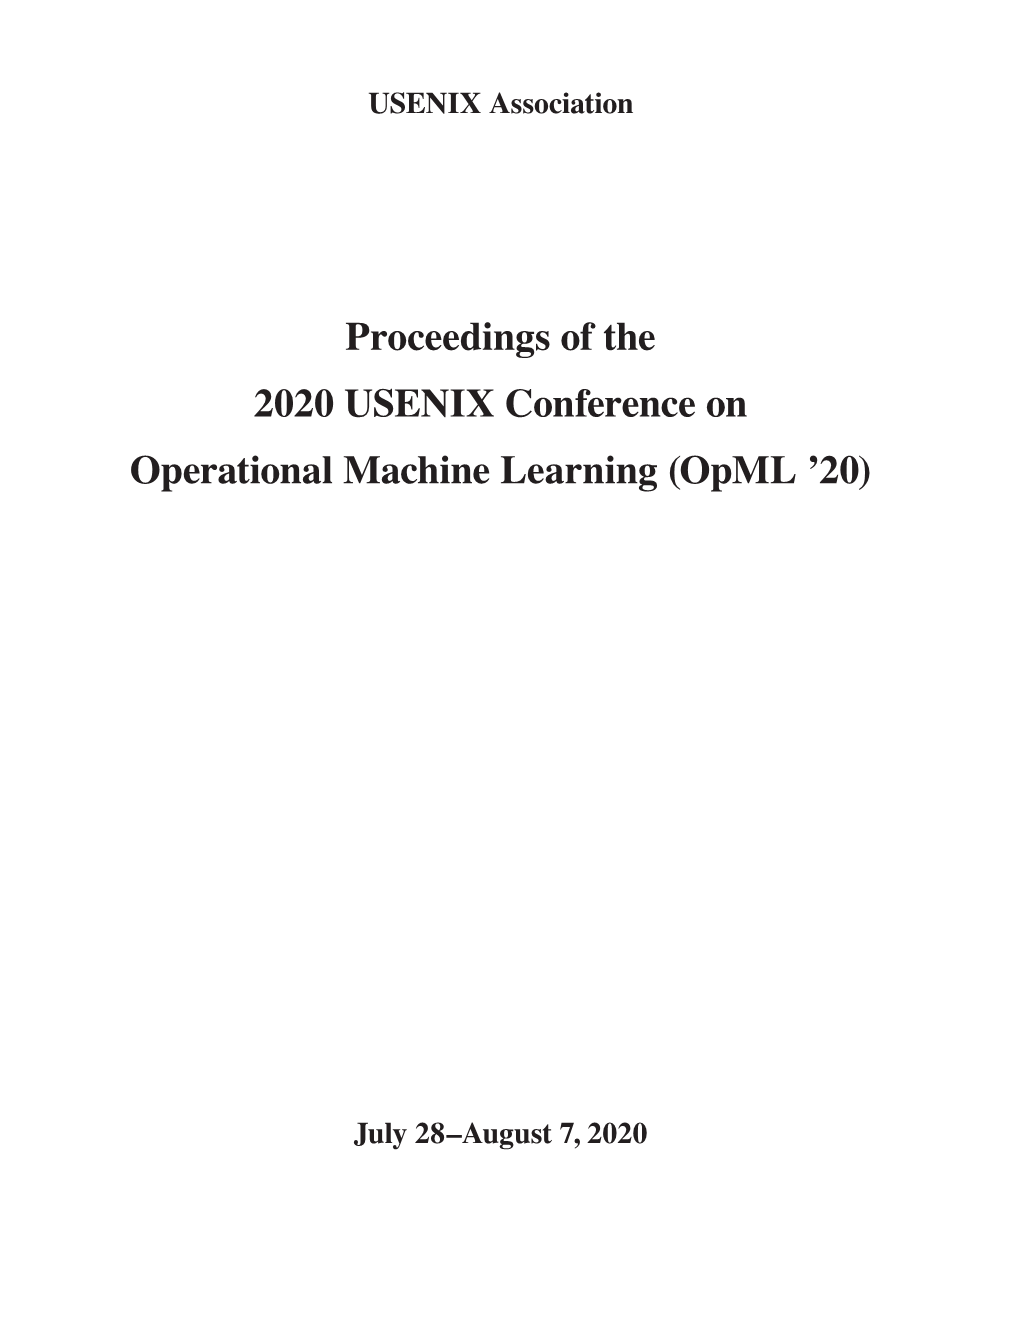 Proceedings of the 2020 USENIX Conference on Operational Machine Learning (Opml '20)